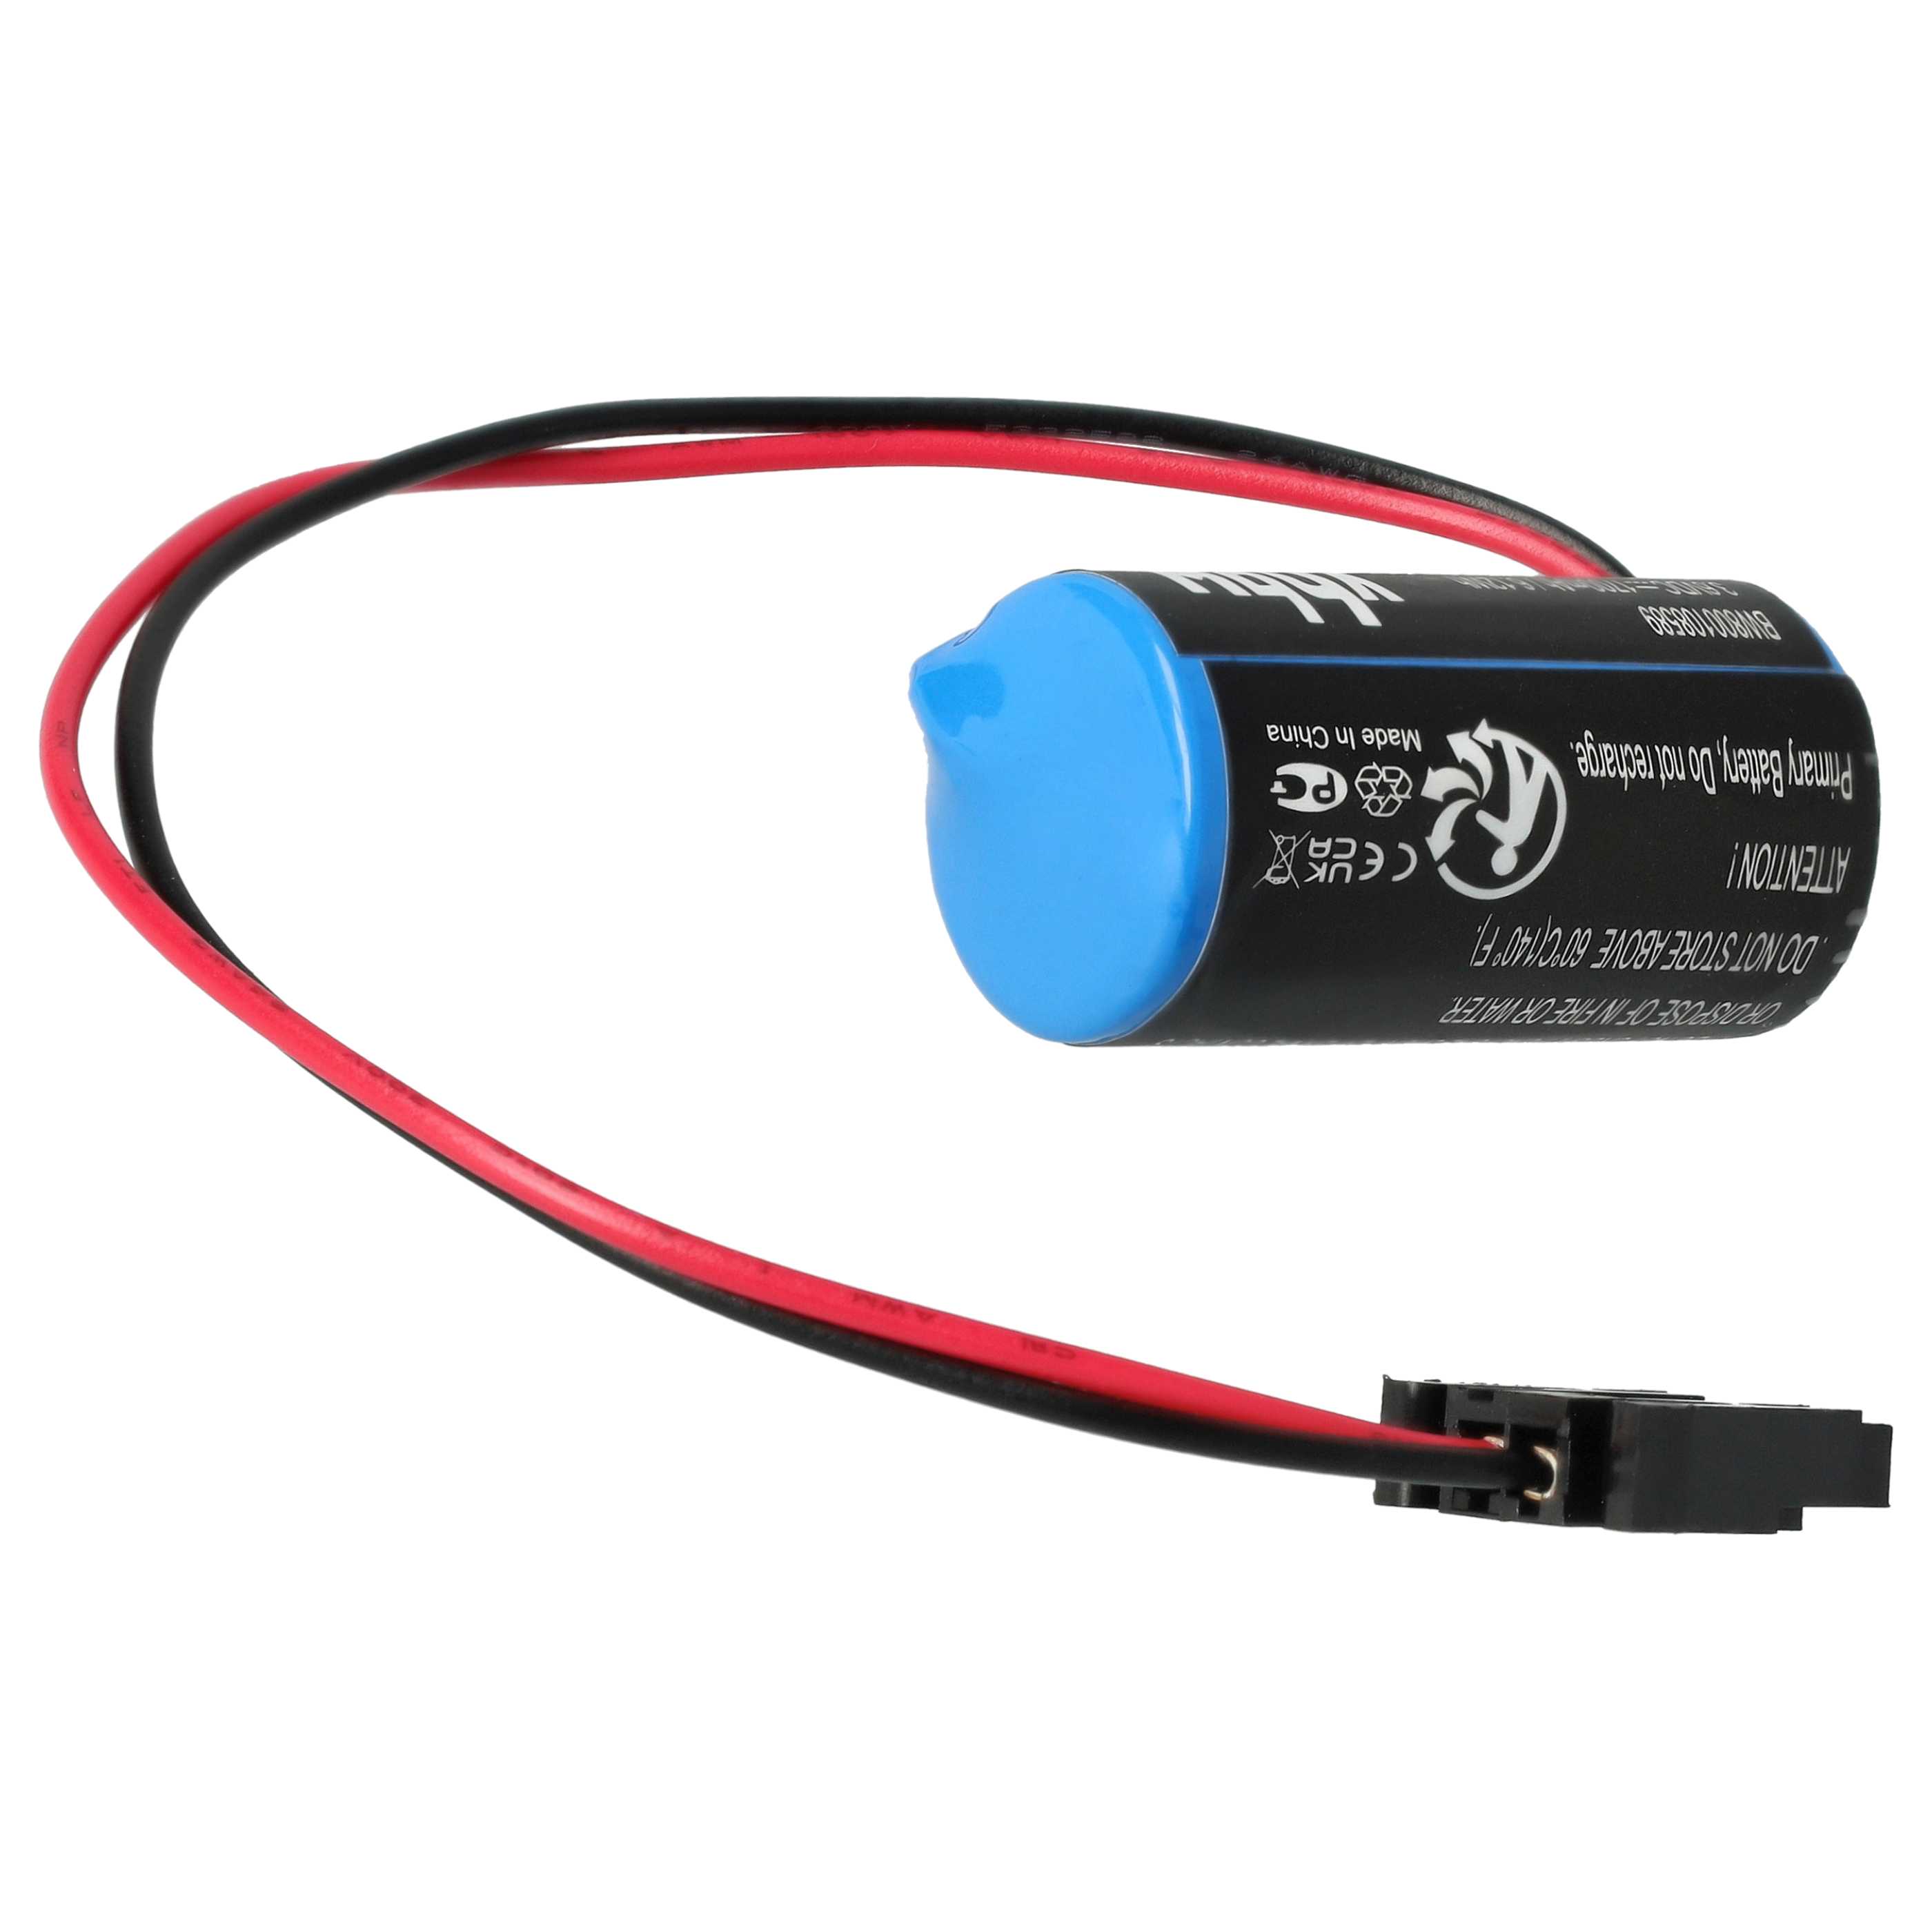 Battery Replacement for B9670-MC for - 1700mAh, 3.6V, Li-Ion